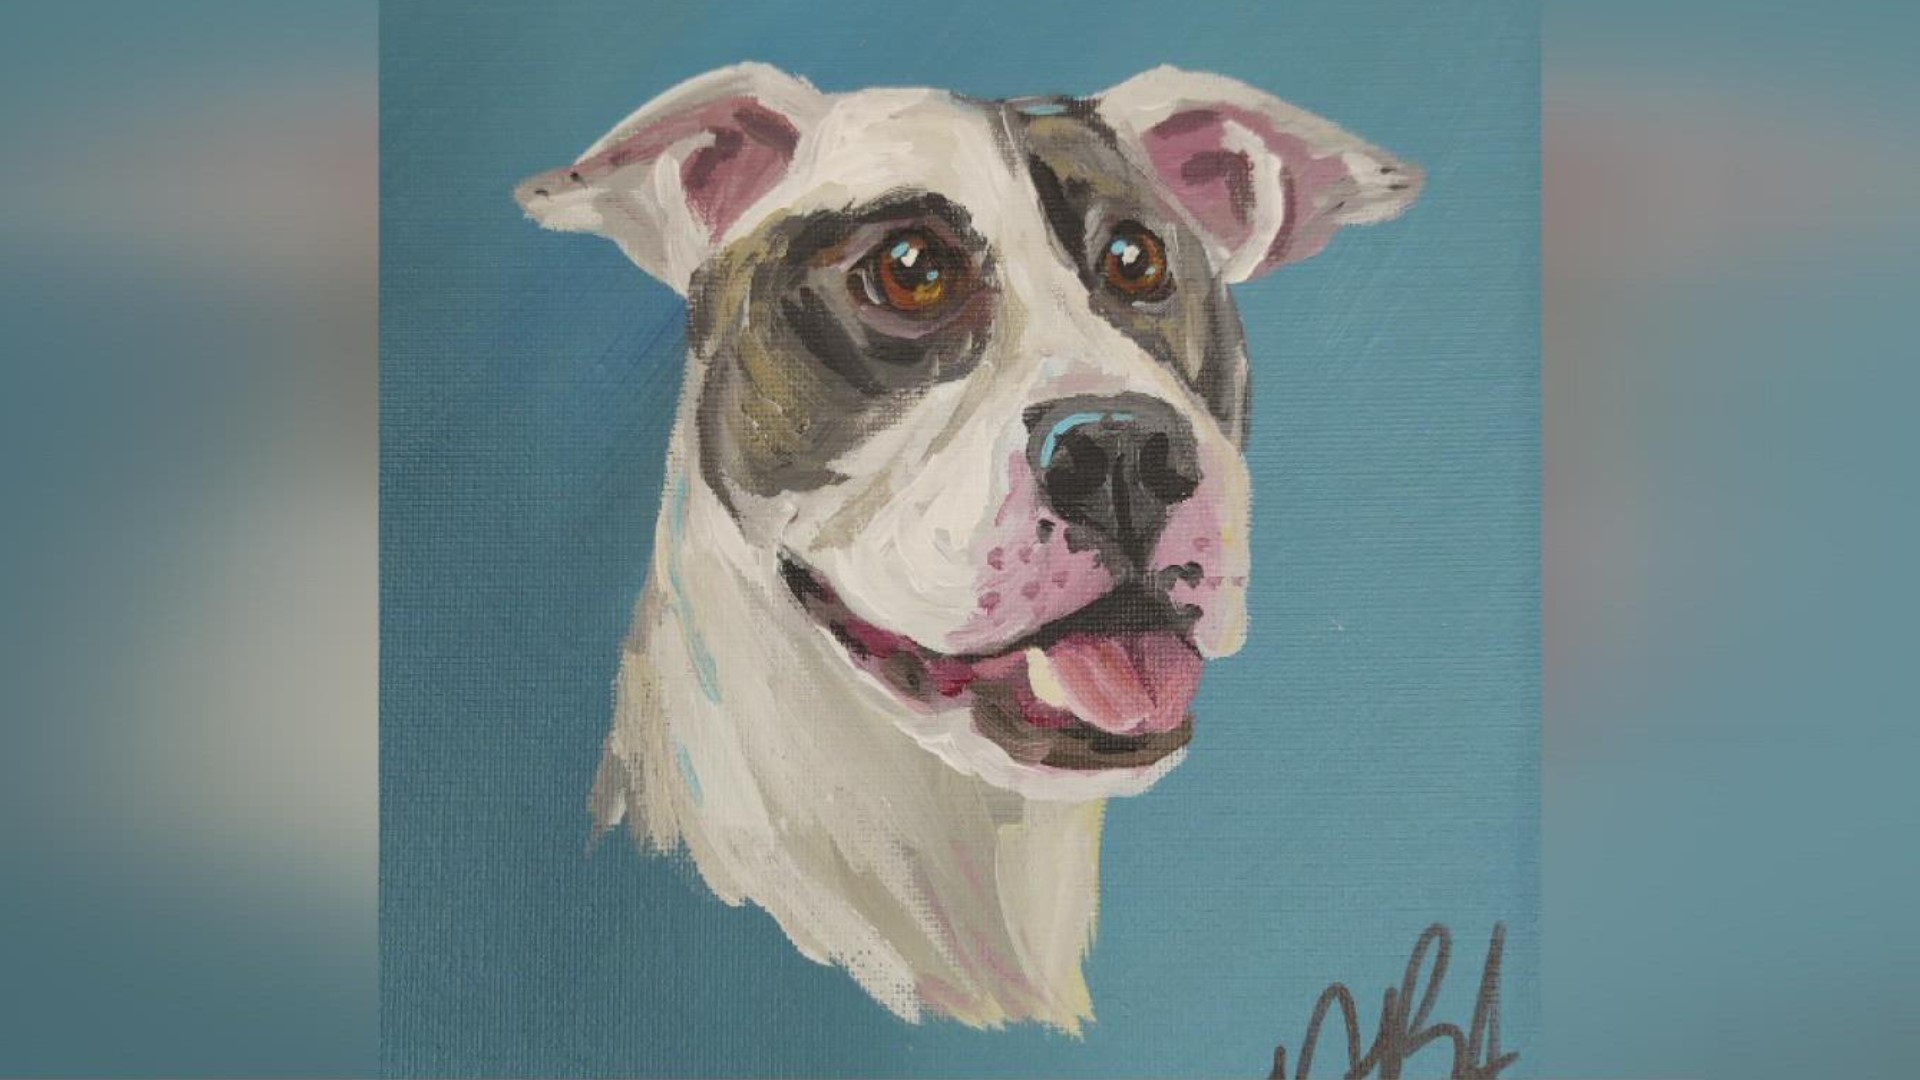 For every $10 donation or more per pet, you can get a custom pet portrait at the Humane Society of West Michigan.